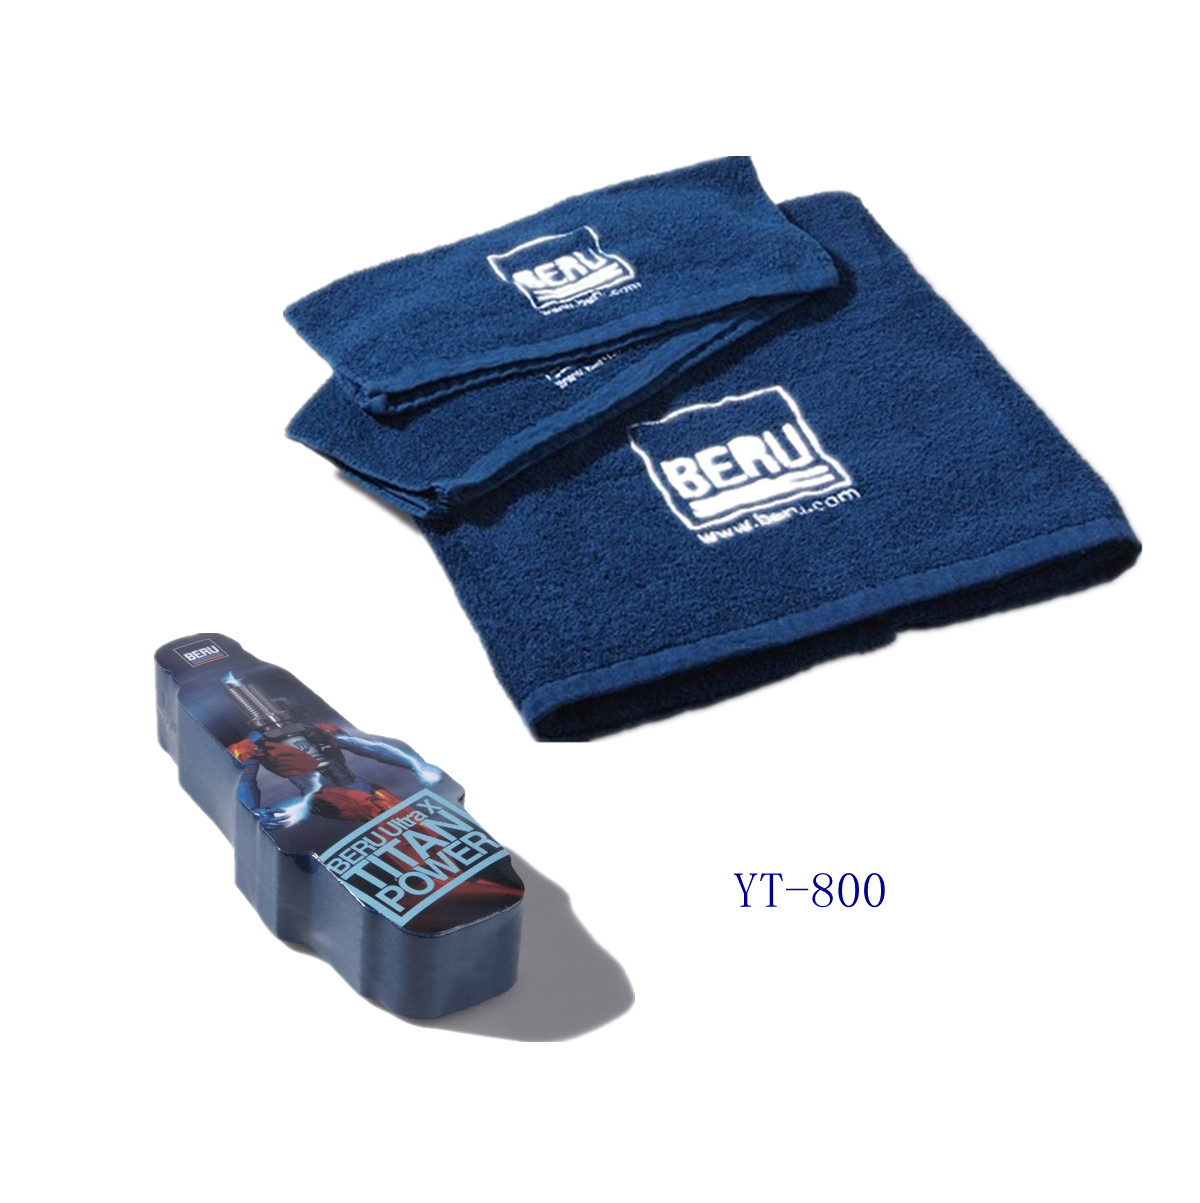 Compressed Towel Sets in Customer's Shape as YT-800